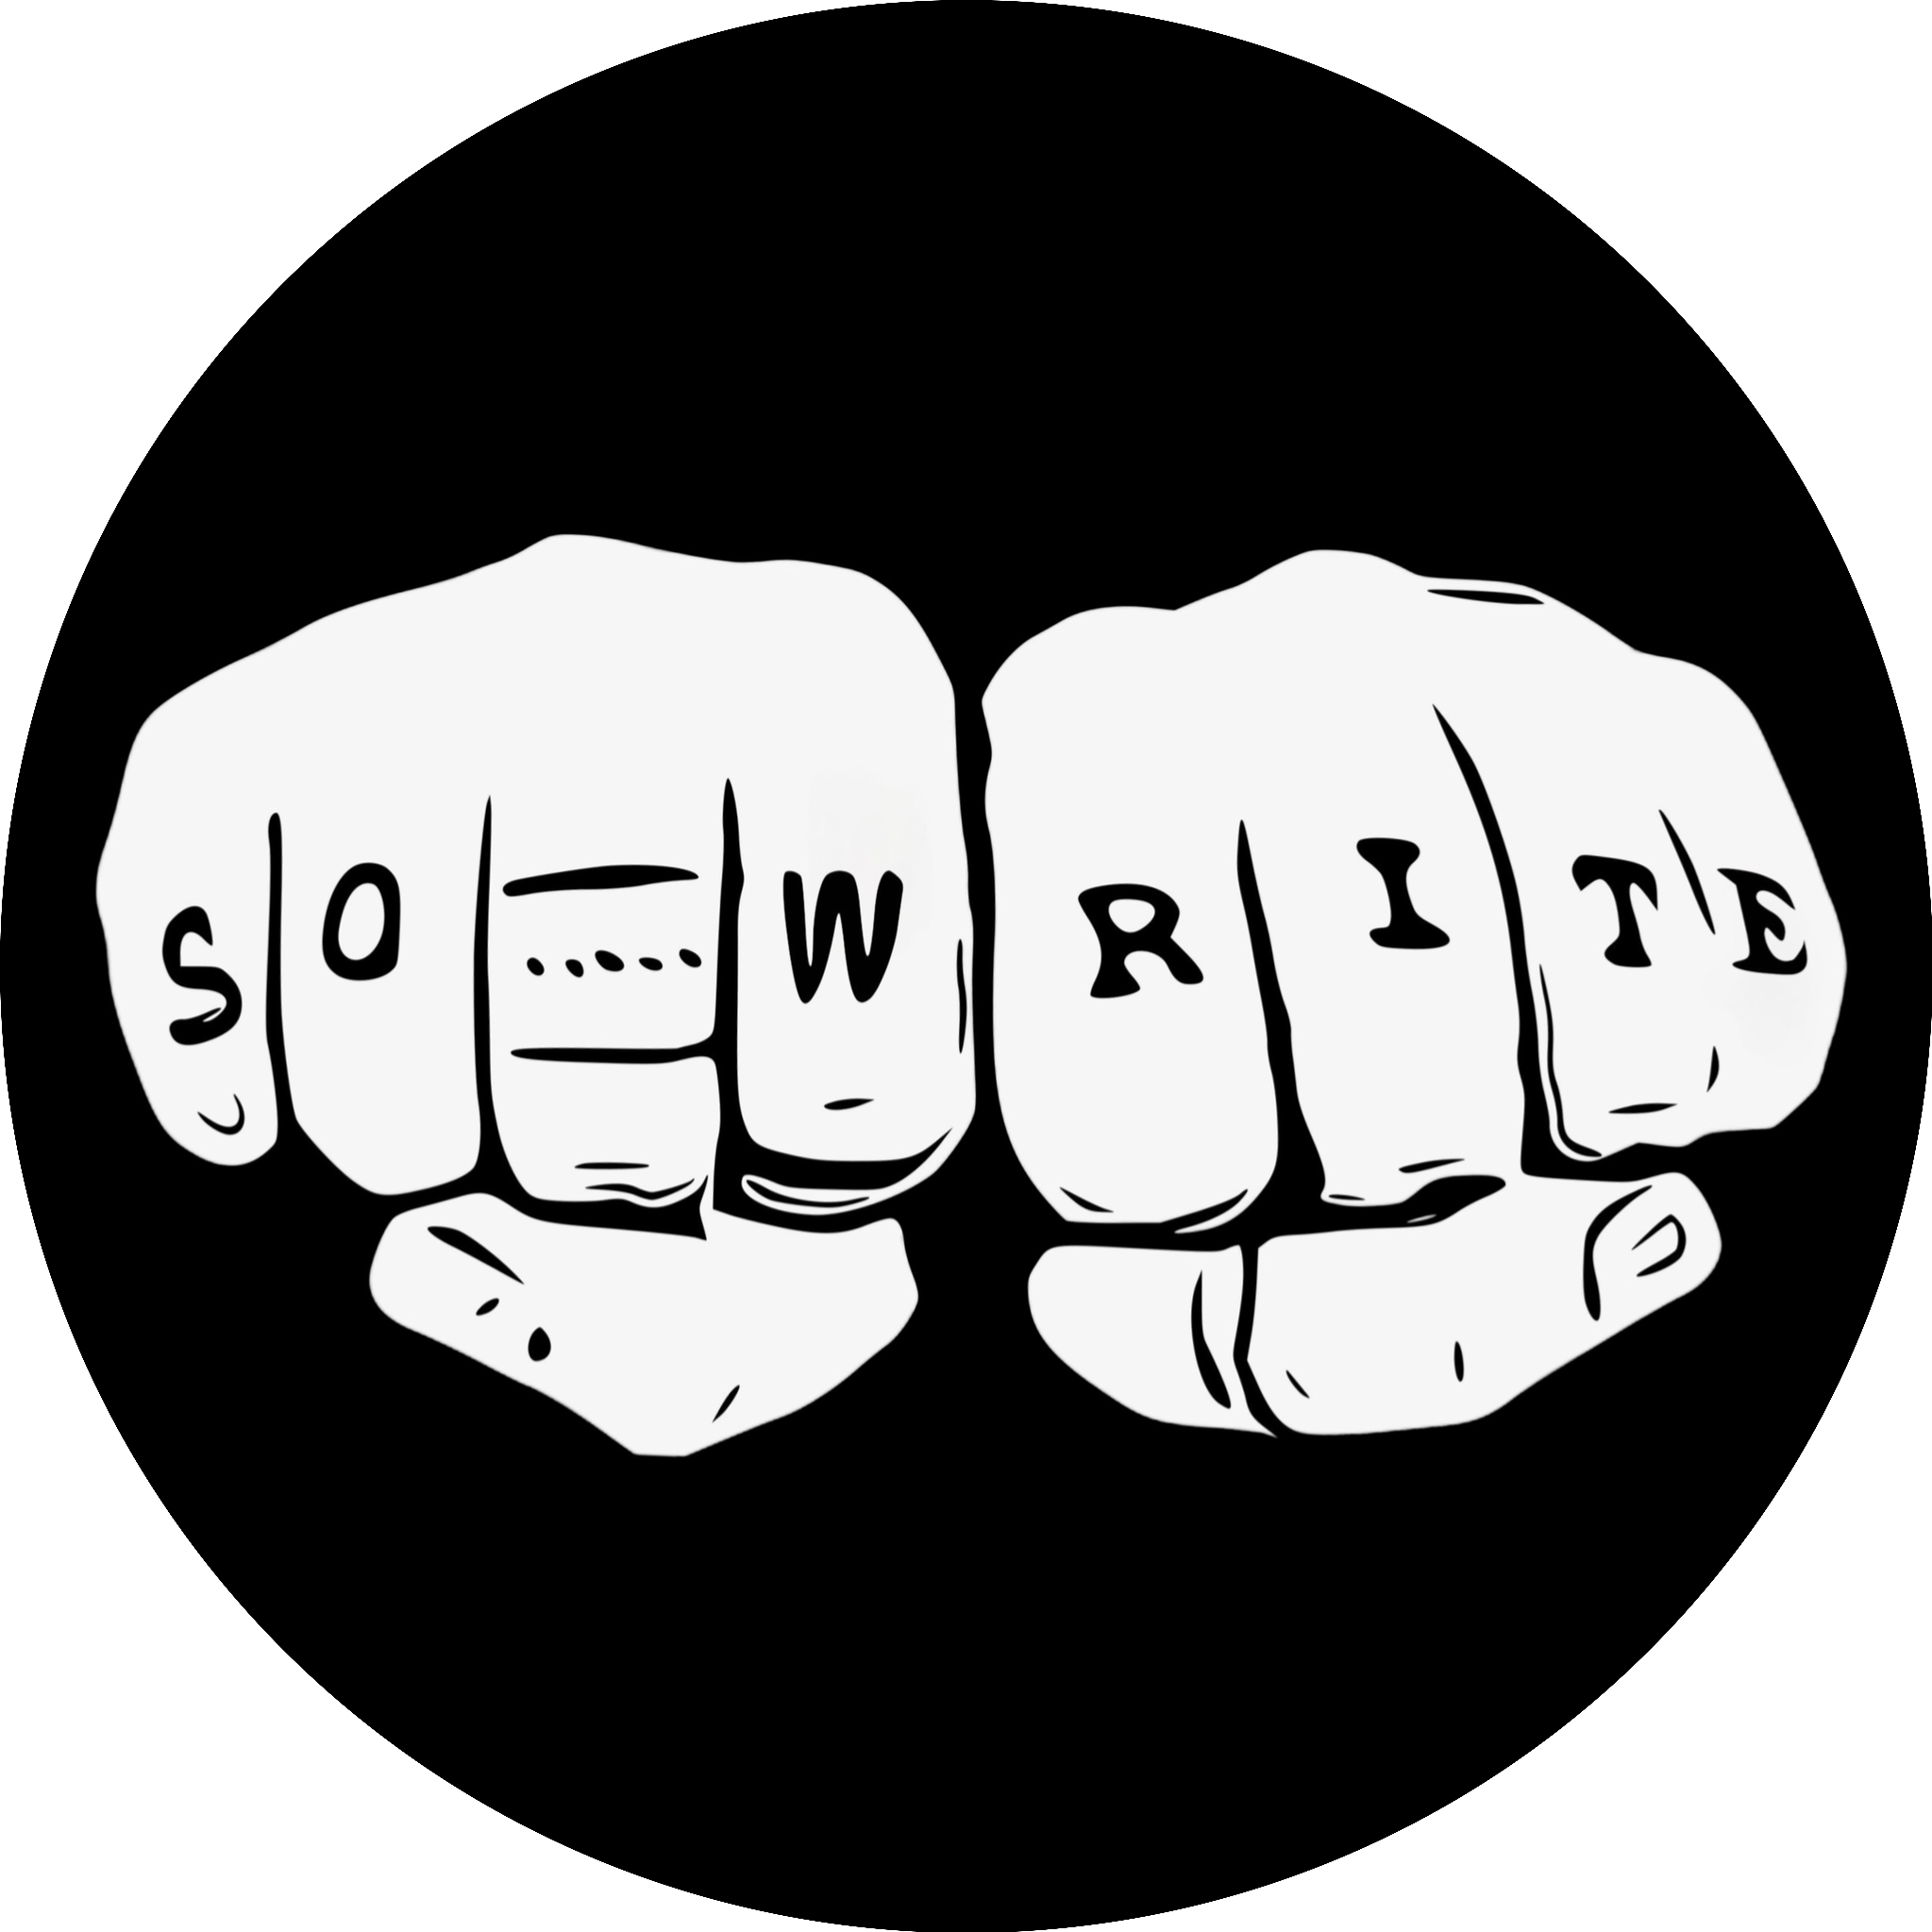 Our Logo. Two fists with "So Write" written on the knuckles. The fists are white. The background is black.